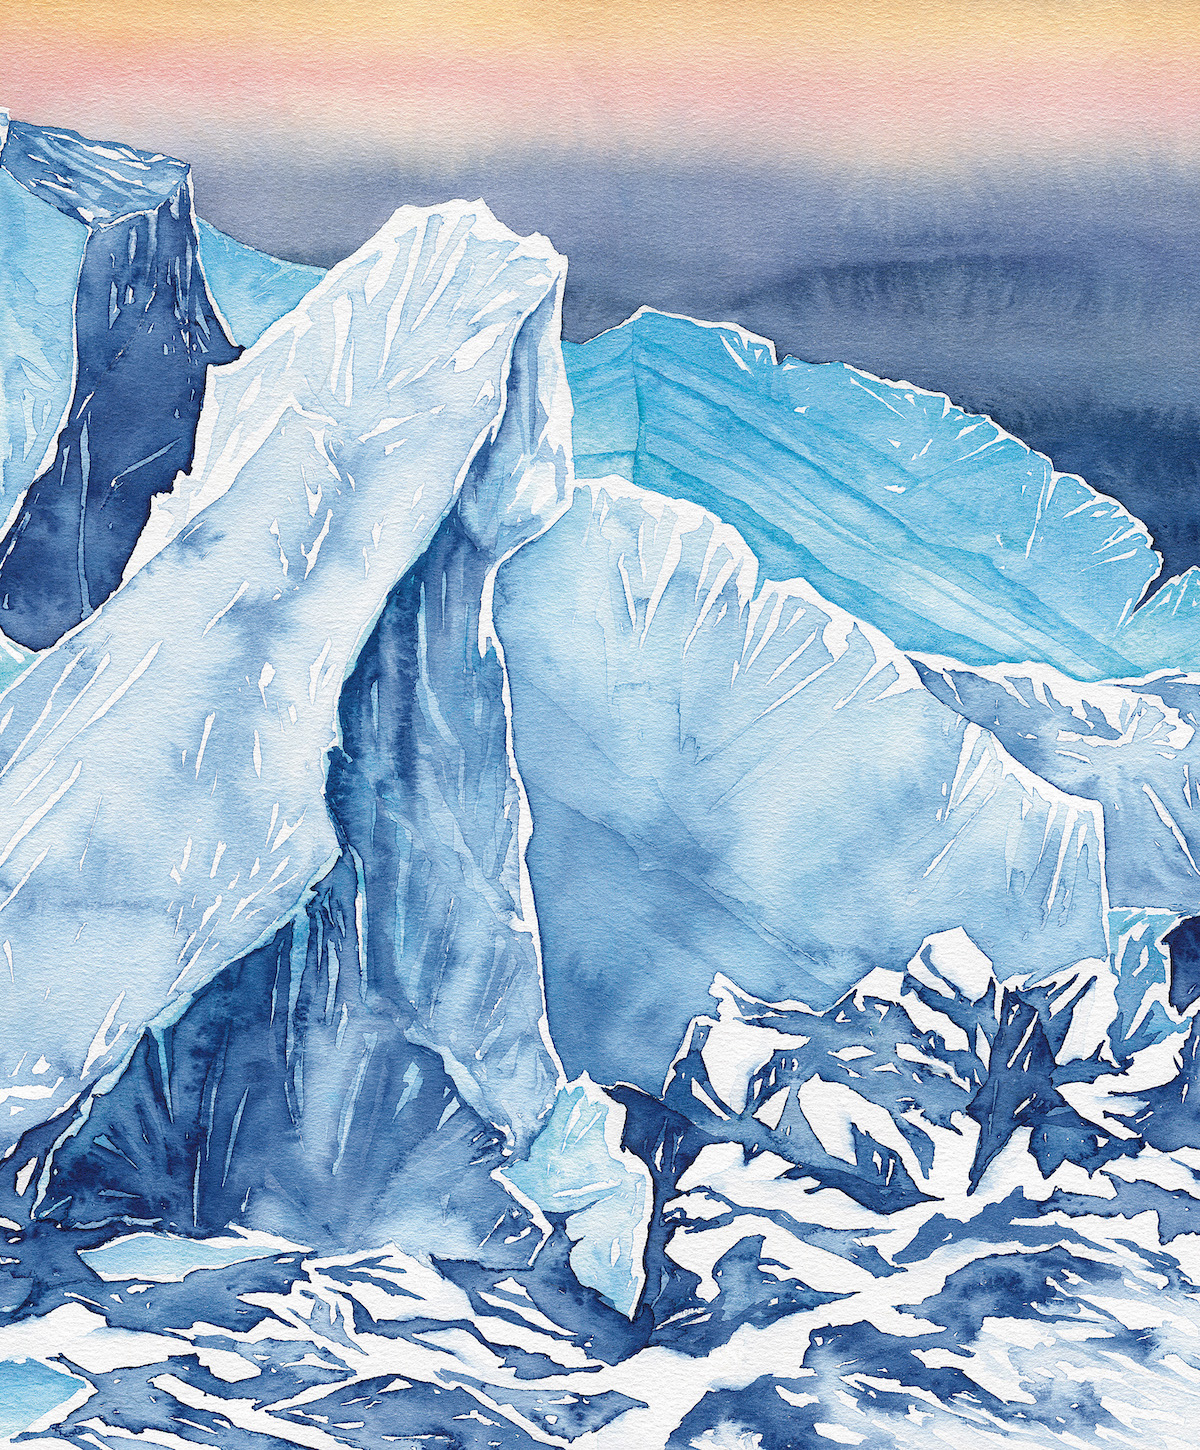 Icefall. Ingraham Glacier, Mt. Rainier (14,410'), Cascades, Washington. The artist would like to thank Dallas Glass, Jason Hummel and Casey Sullivan for sharing reference imagery for some of the paintings in the essay. [Artwork] Claire Giordano